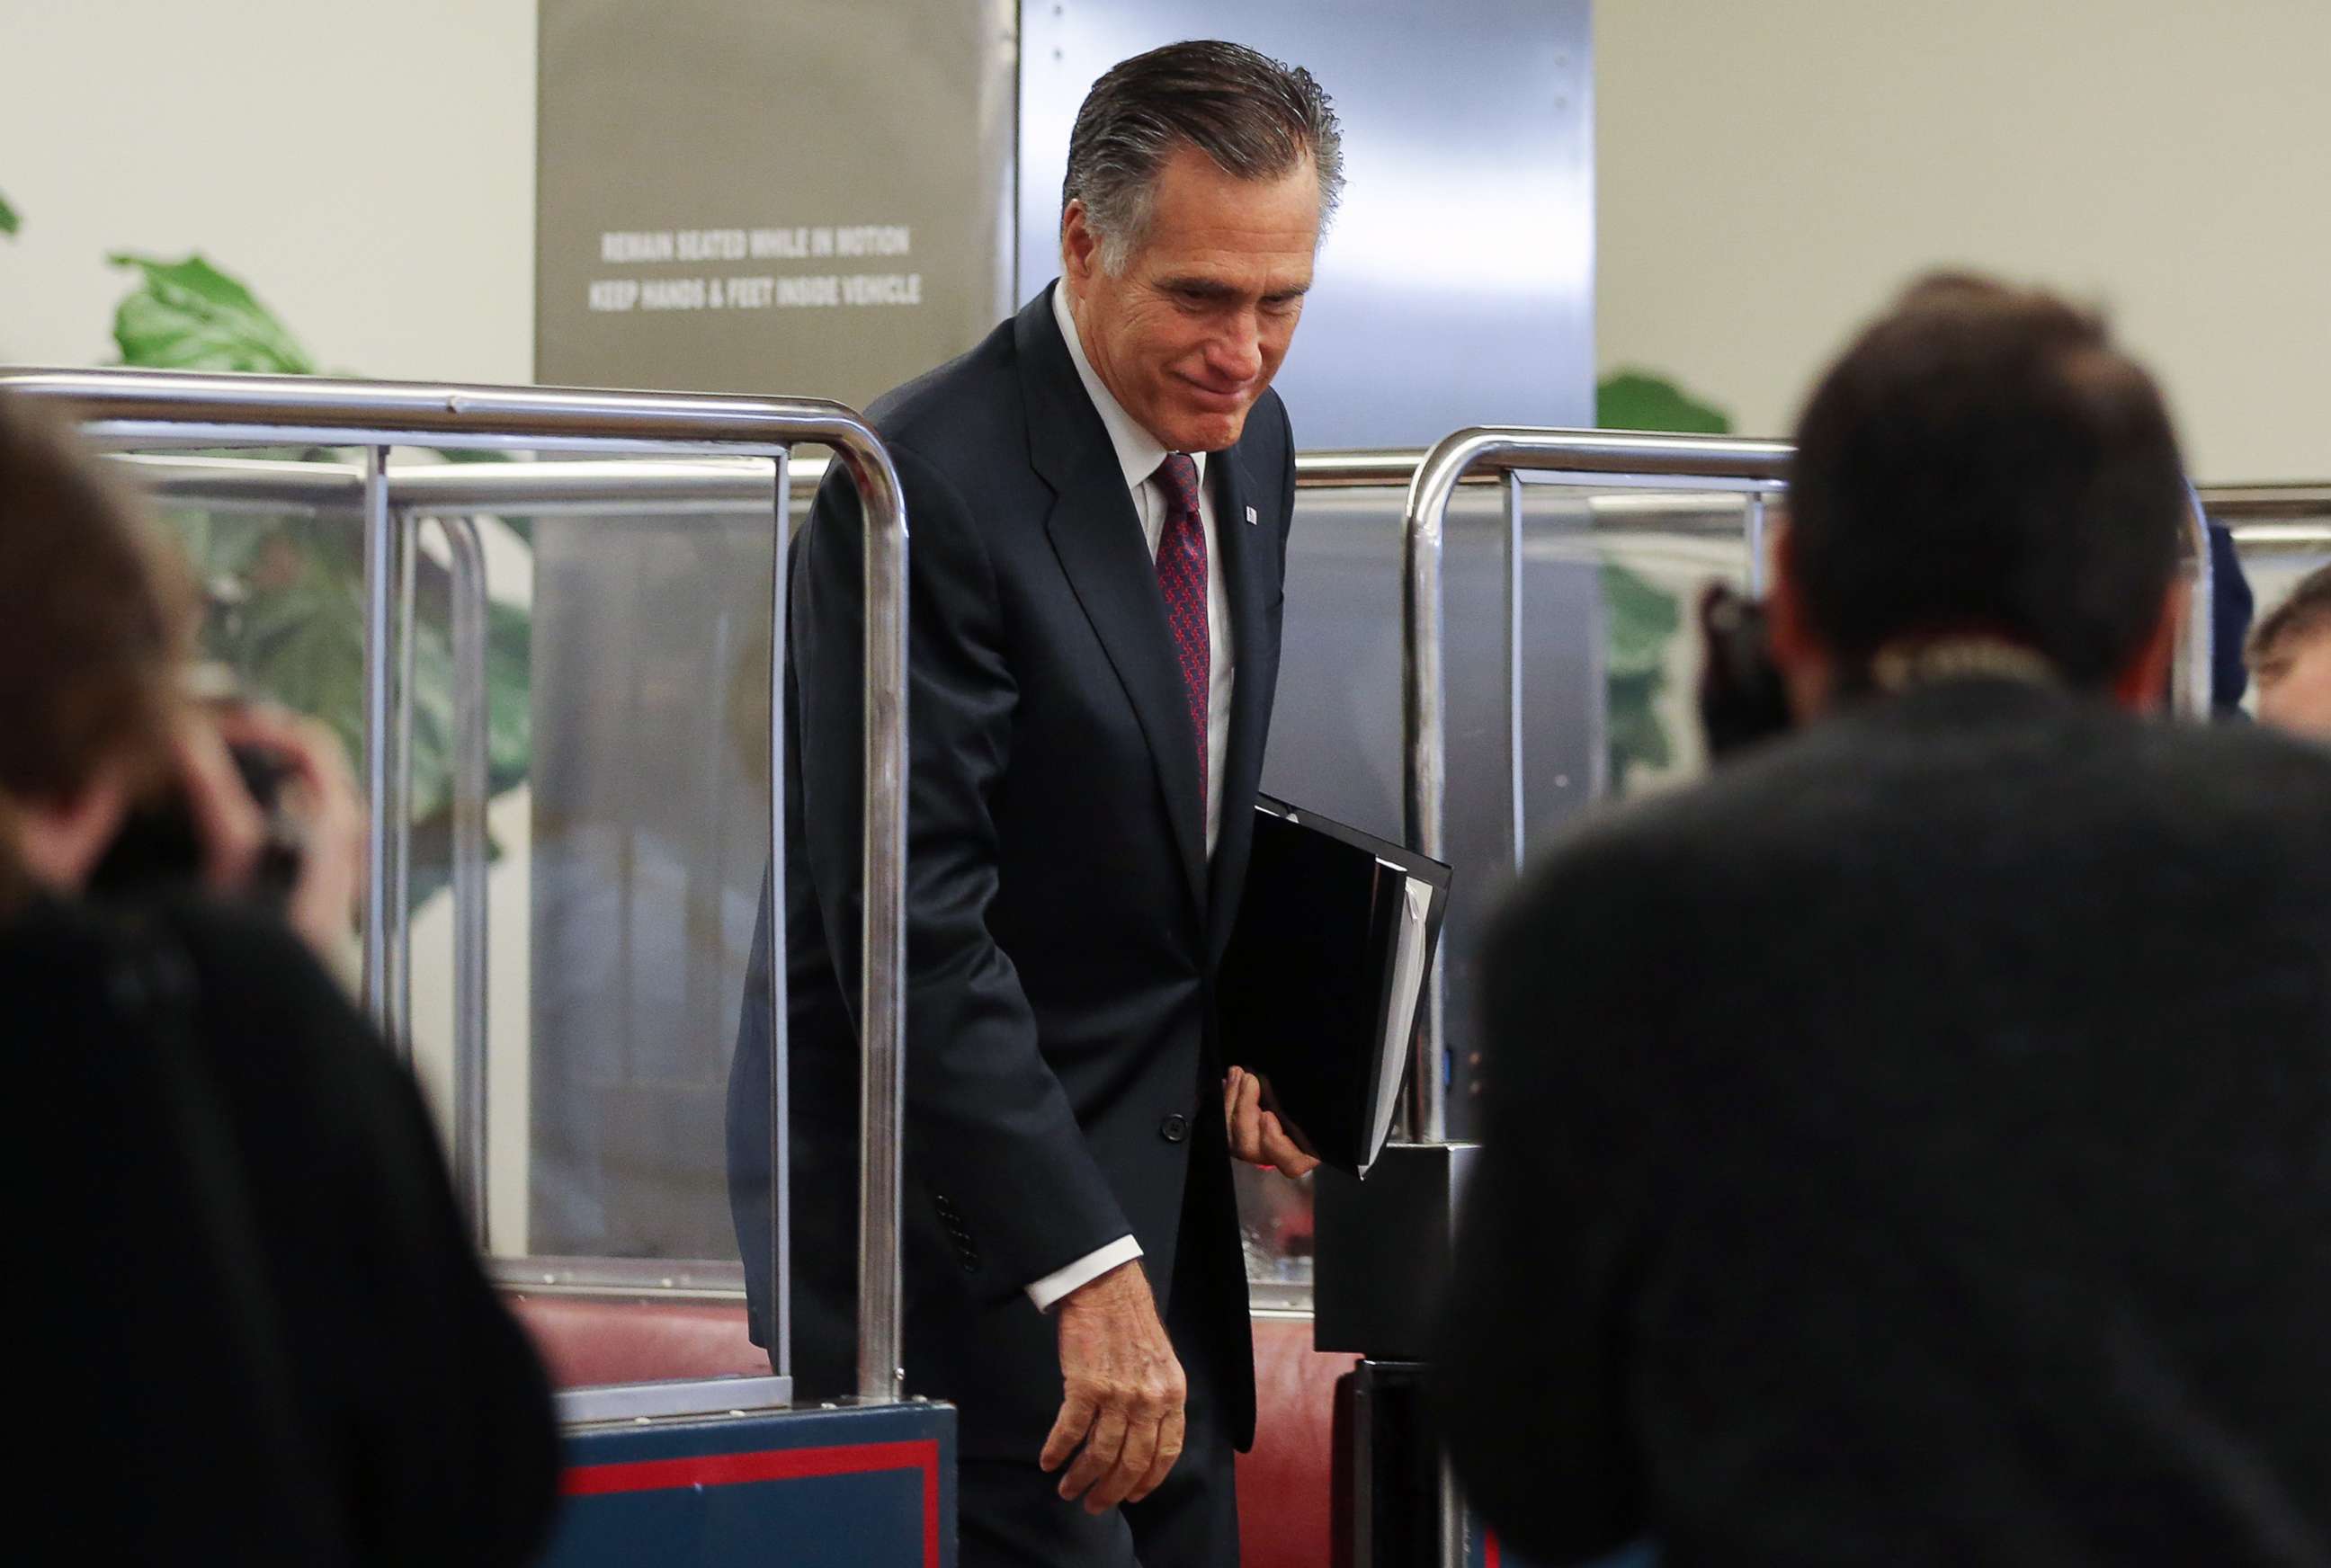 PHOTO: Sen. Mitt Romney departs the Senate subway upon arrival to the Capitol for the Senate impeachment trial on Jan, 28, 2020 in Washington, D.C.